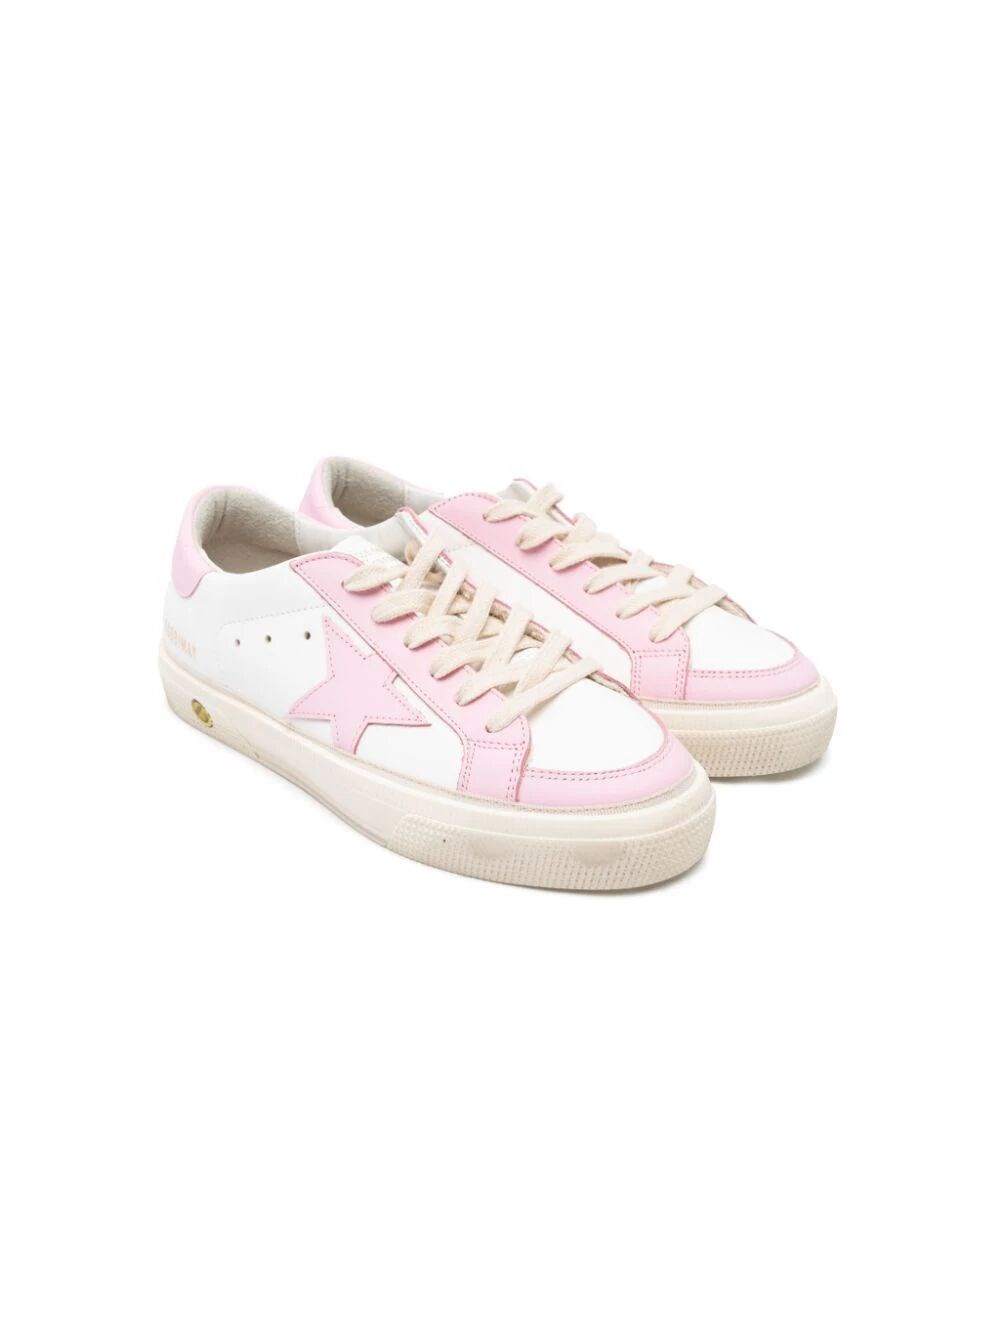 Golden Goose Kids' May Leather Trainers In White